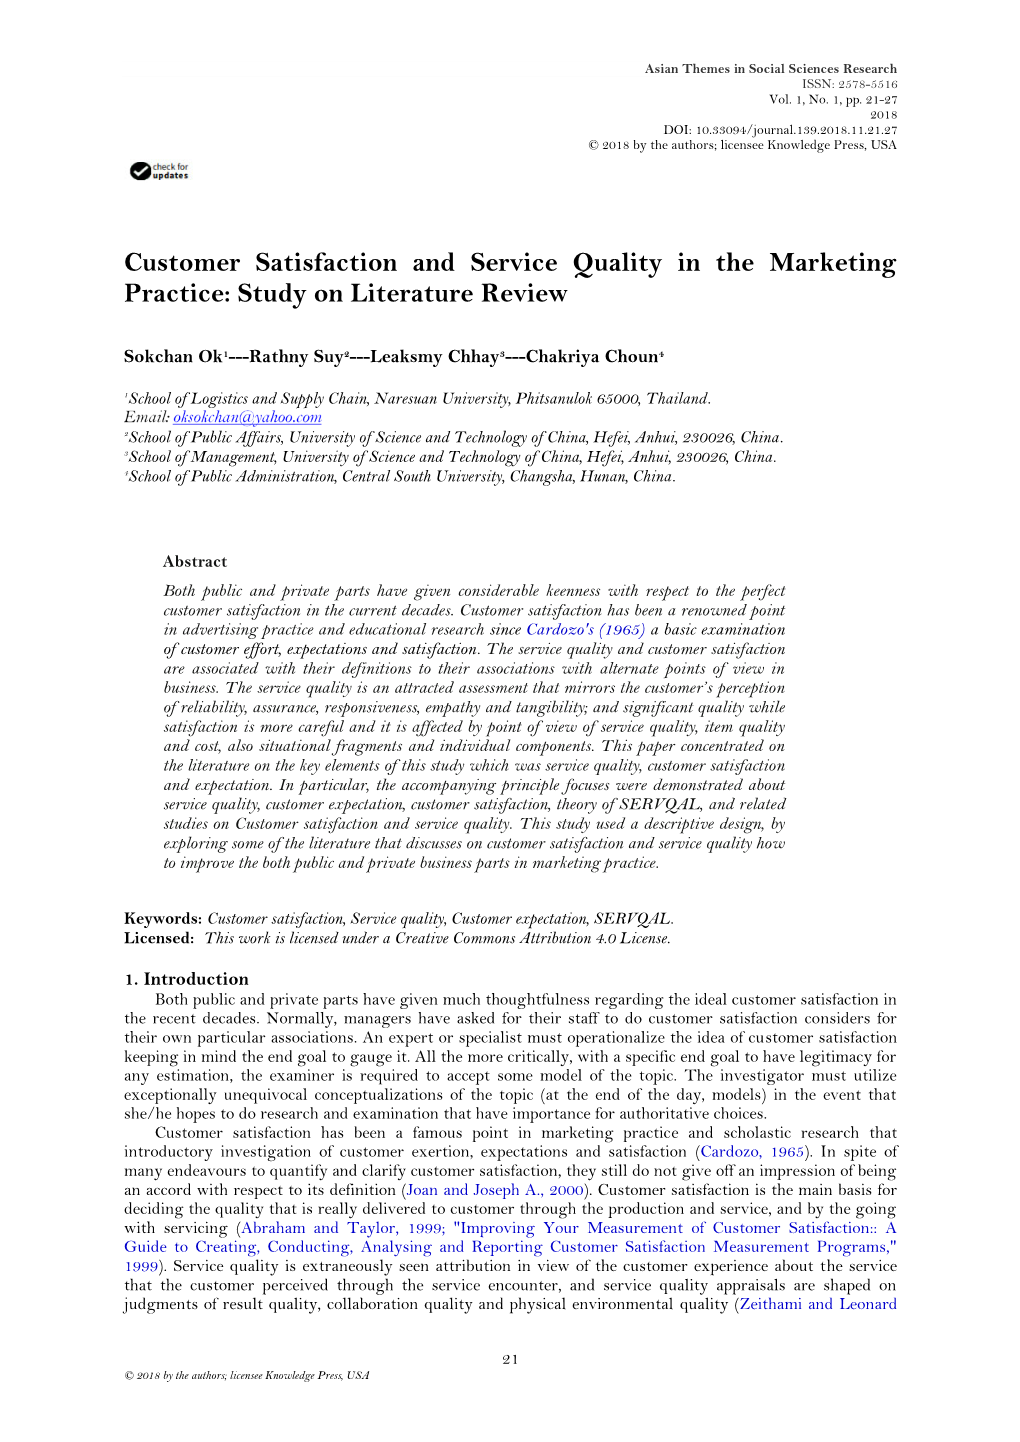 Customer Satisfaction and Service Quality in the Marketing Practice: Study on Literature Review